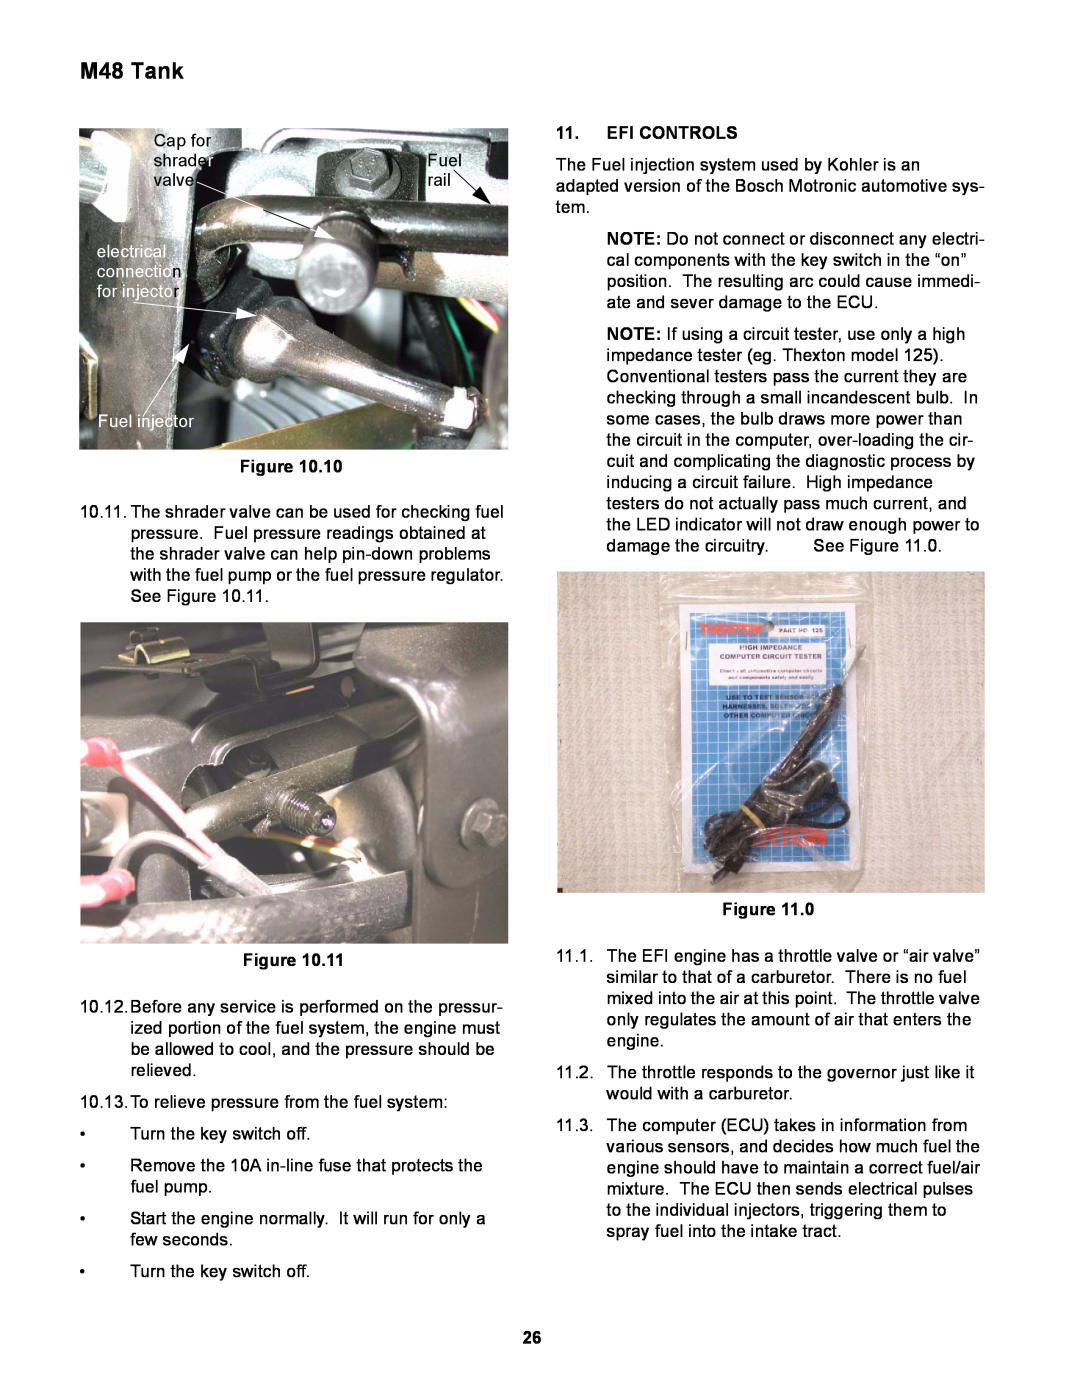 Cub Cadet service manual M48 Tank, electrical connection for injector Fuel injector, Figure, Efi Controls 